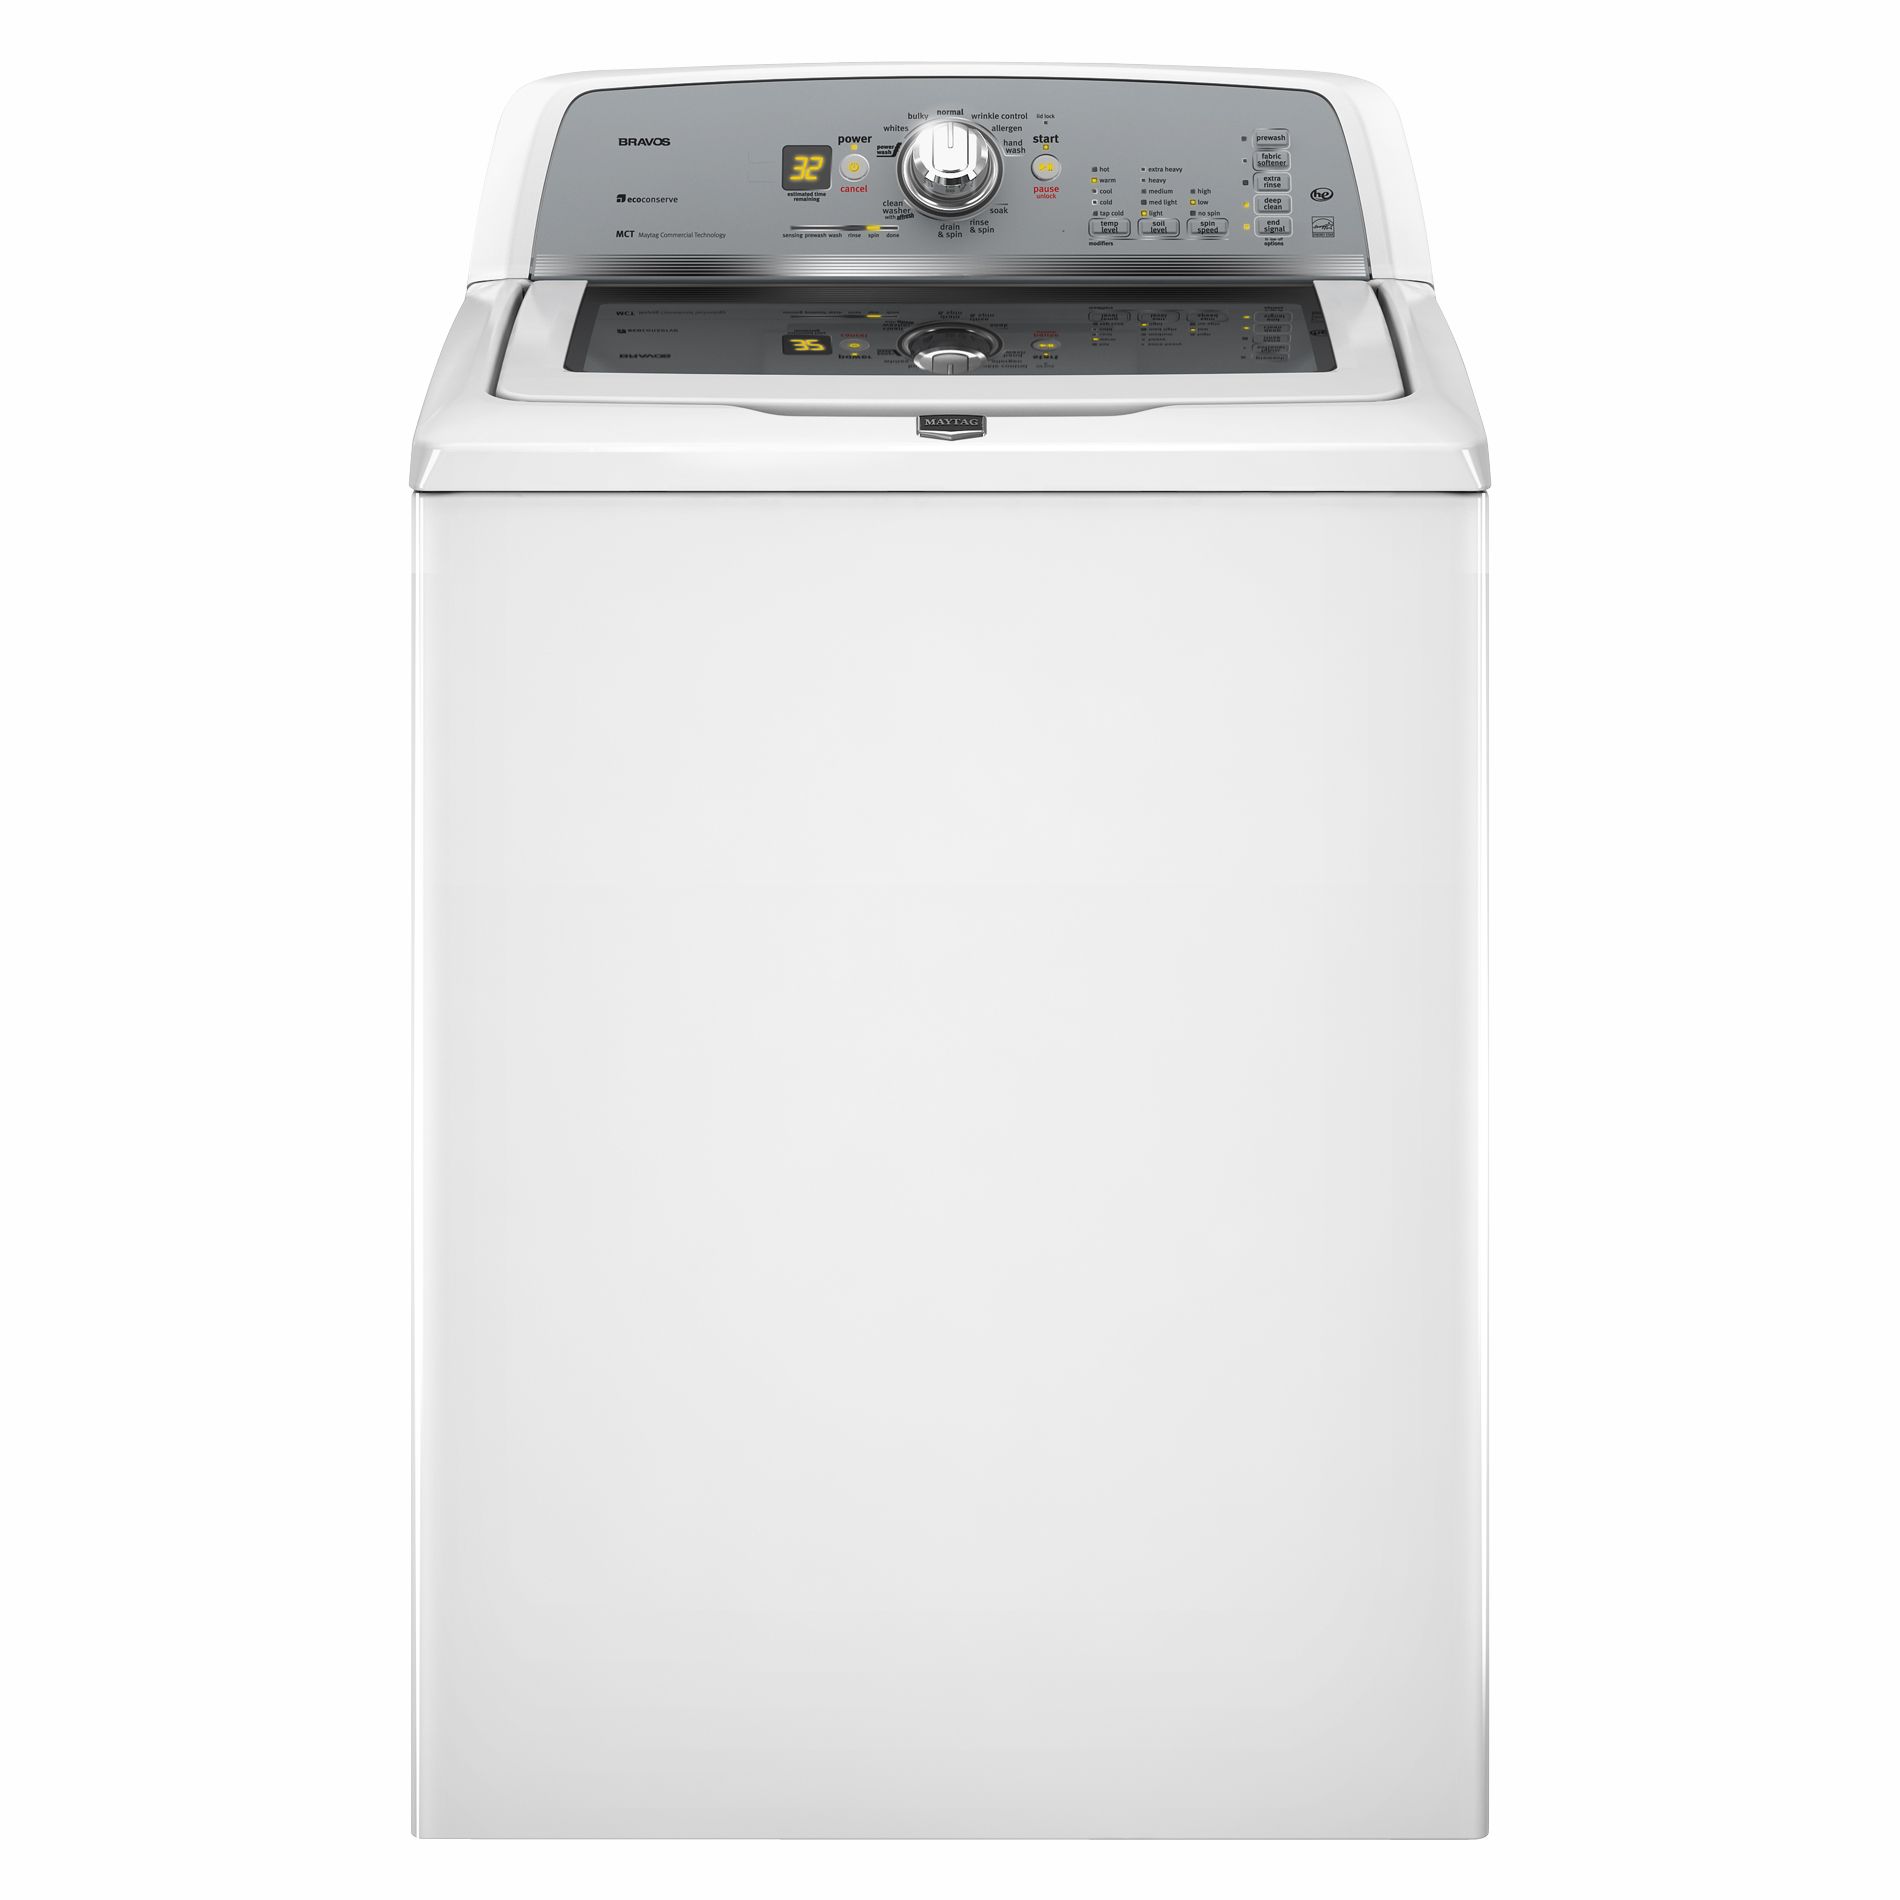 Maytag 3.6 cu. ft. High-Efficiency Top-Load Washer - White